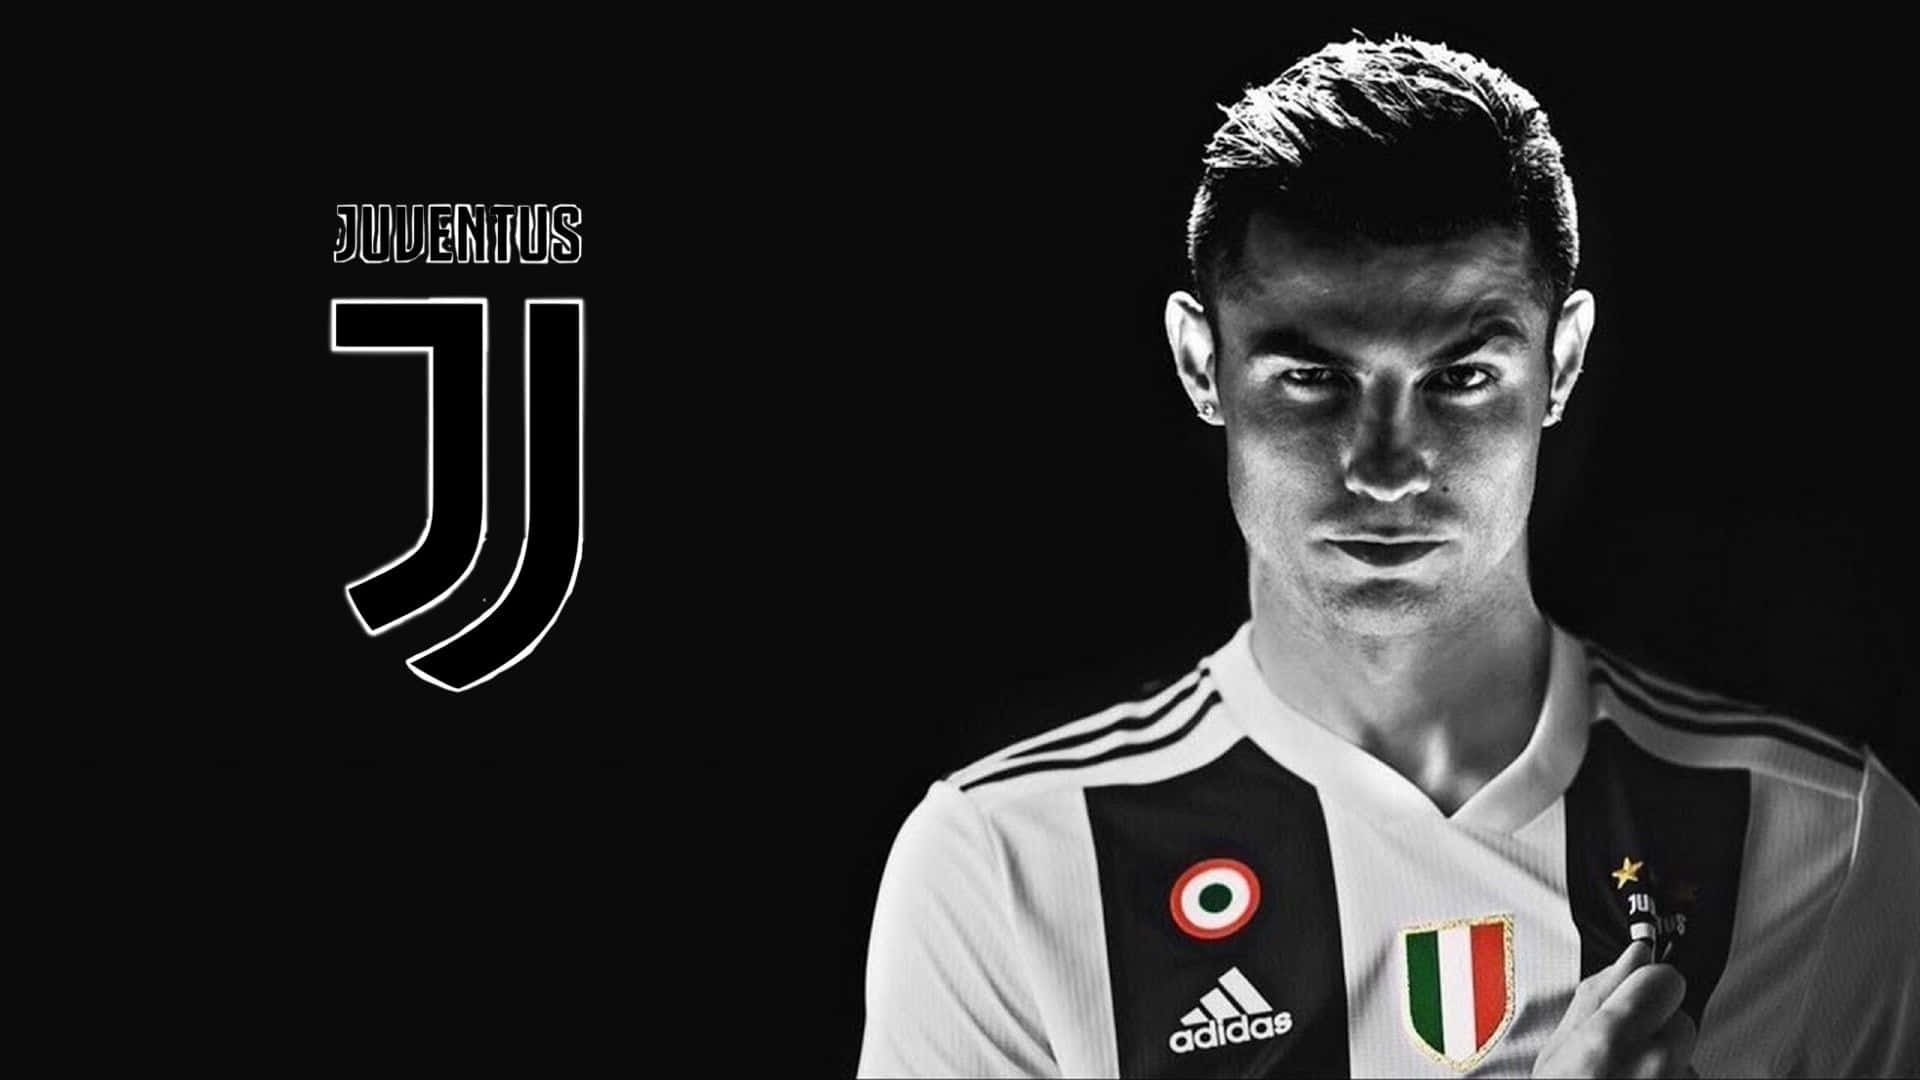 The iconic black and white of Juventus FC